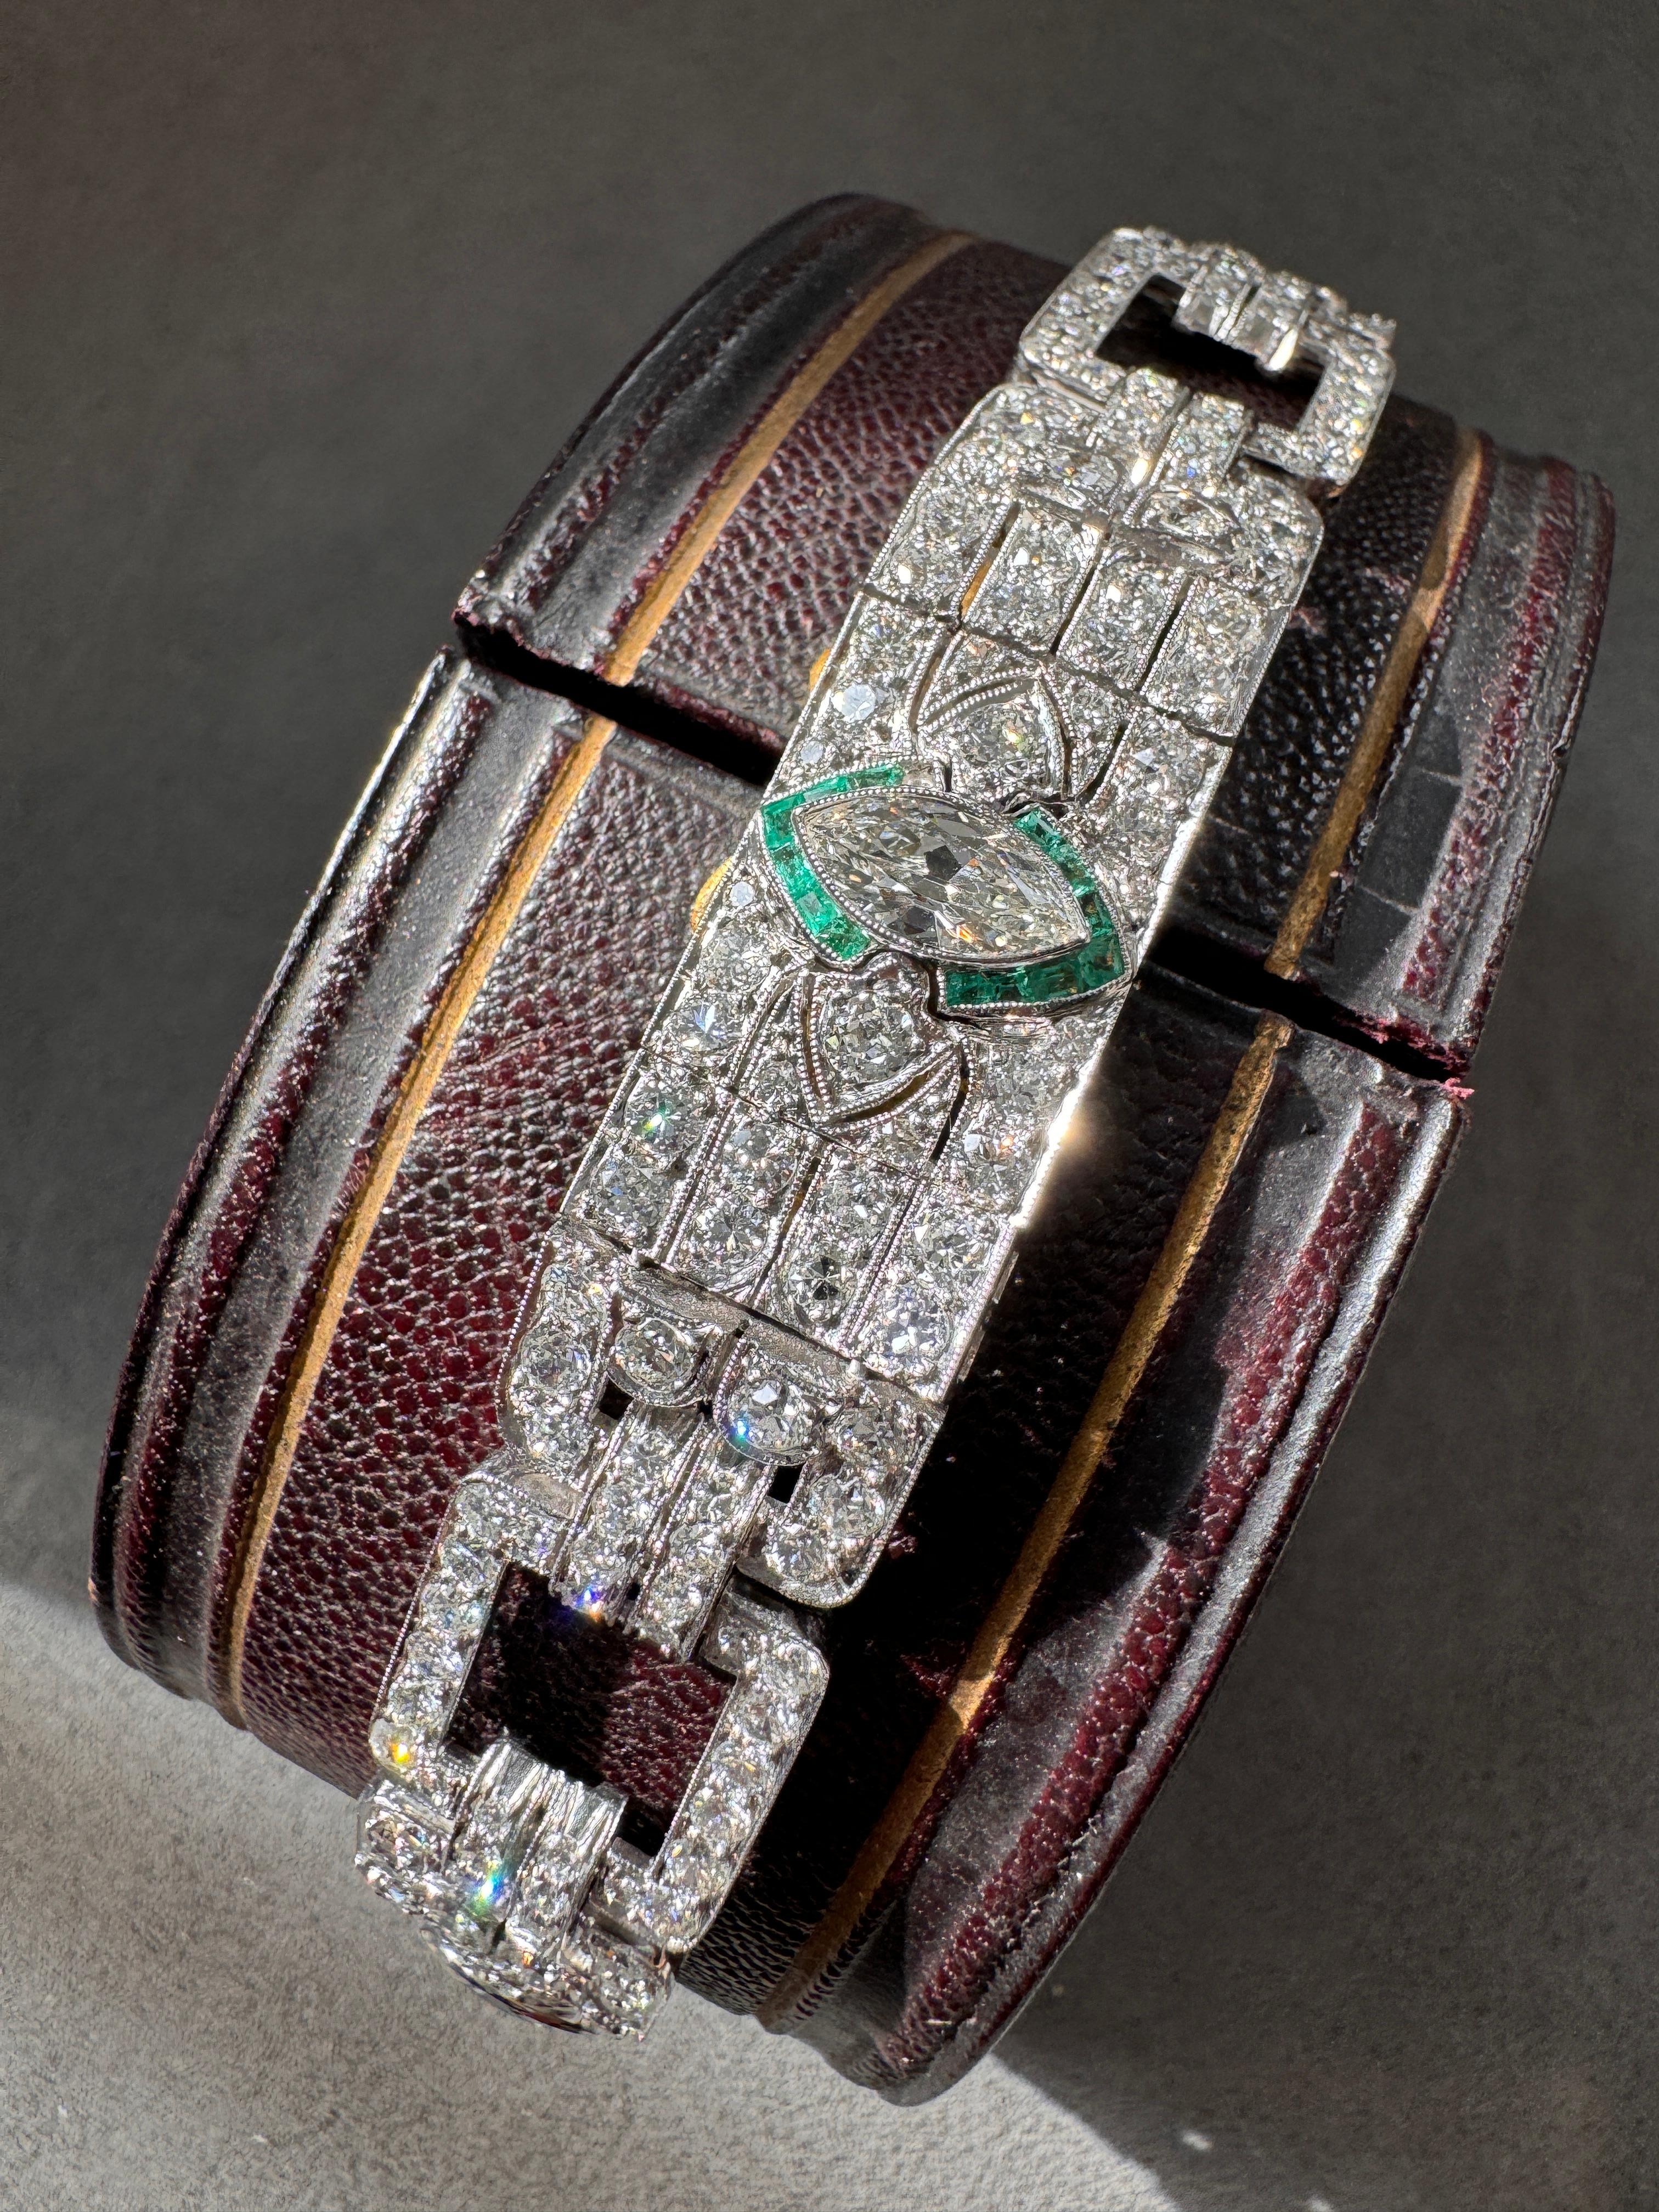 This sensational Art Deco bracelet is comprised of three segments, each centered by an old marquise-cut diamond outlined in glowing calibre emeralds, accented on each side by full-cut diamond centered arrows. Each glistening diamond plaque is joined